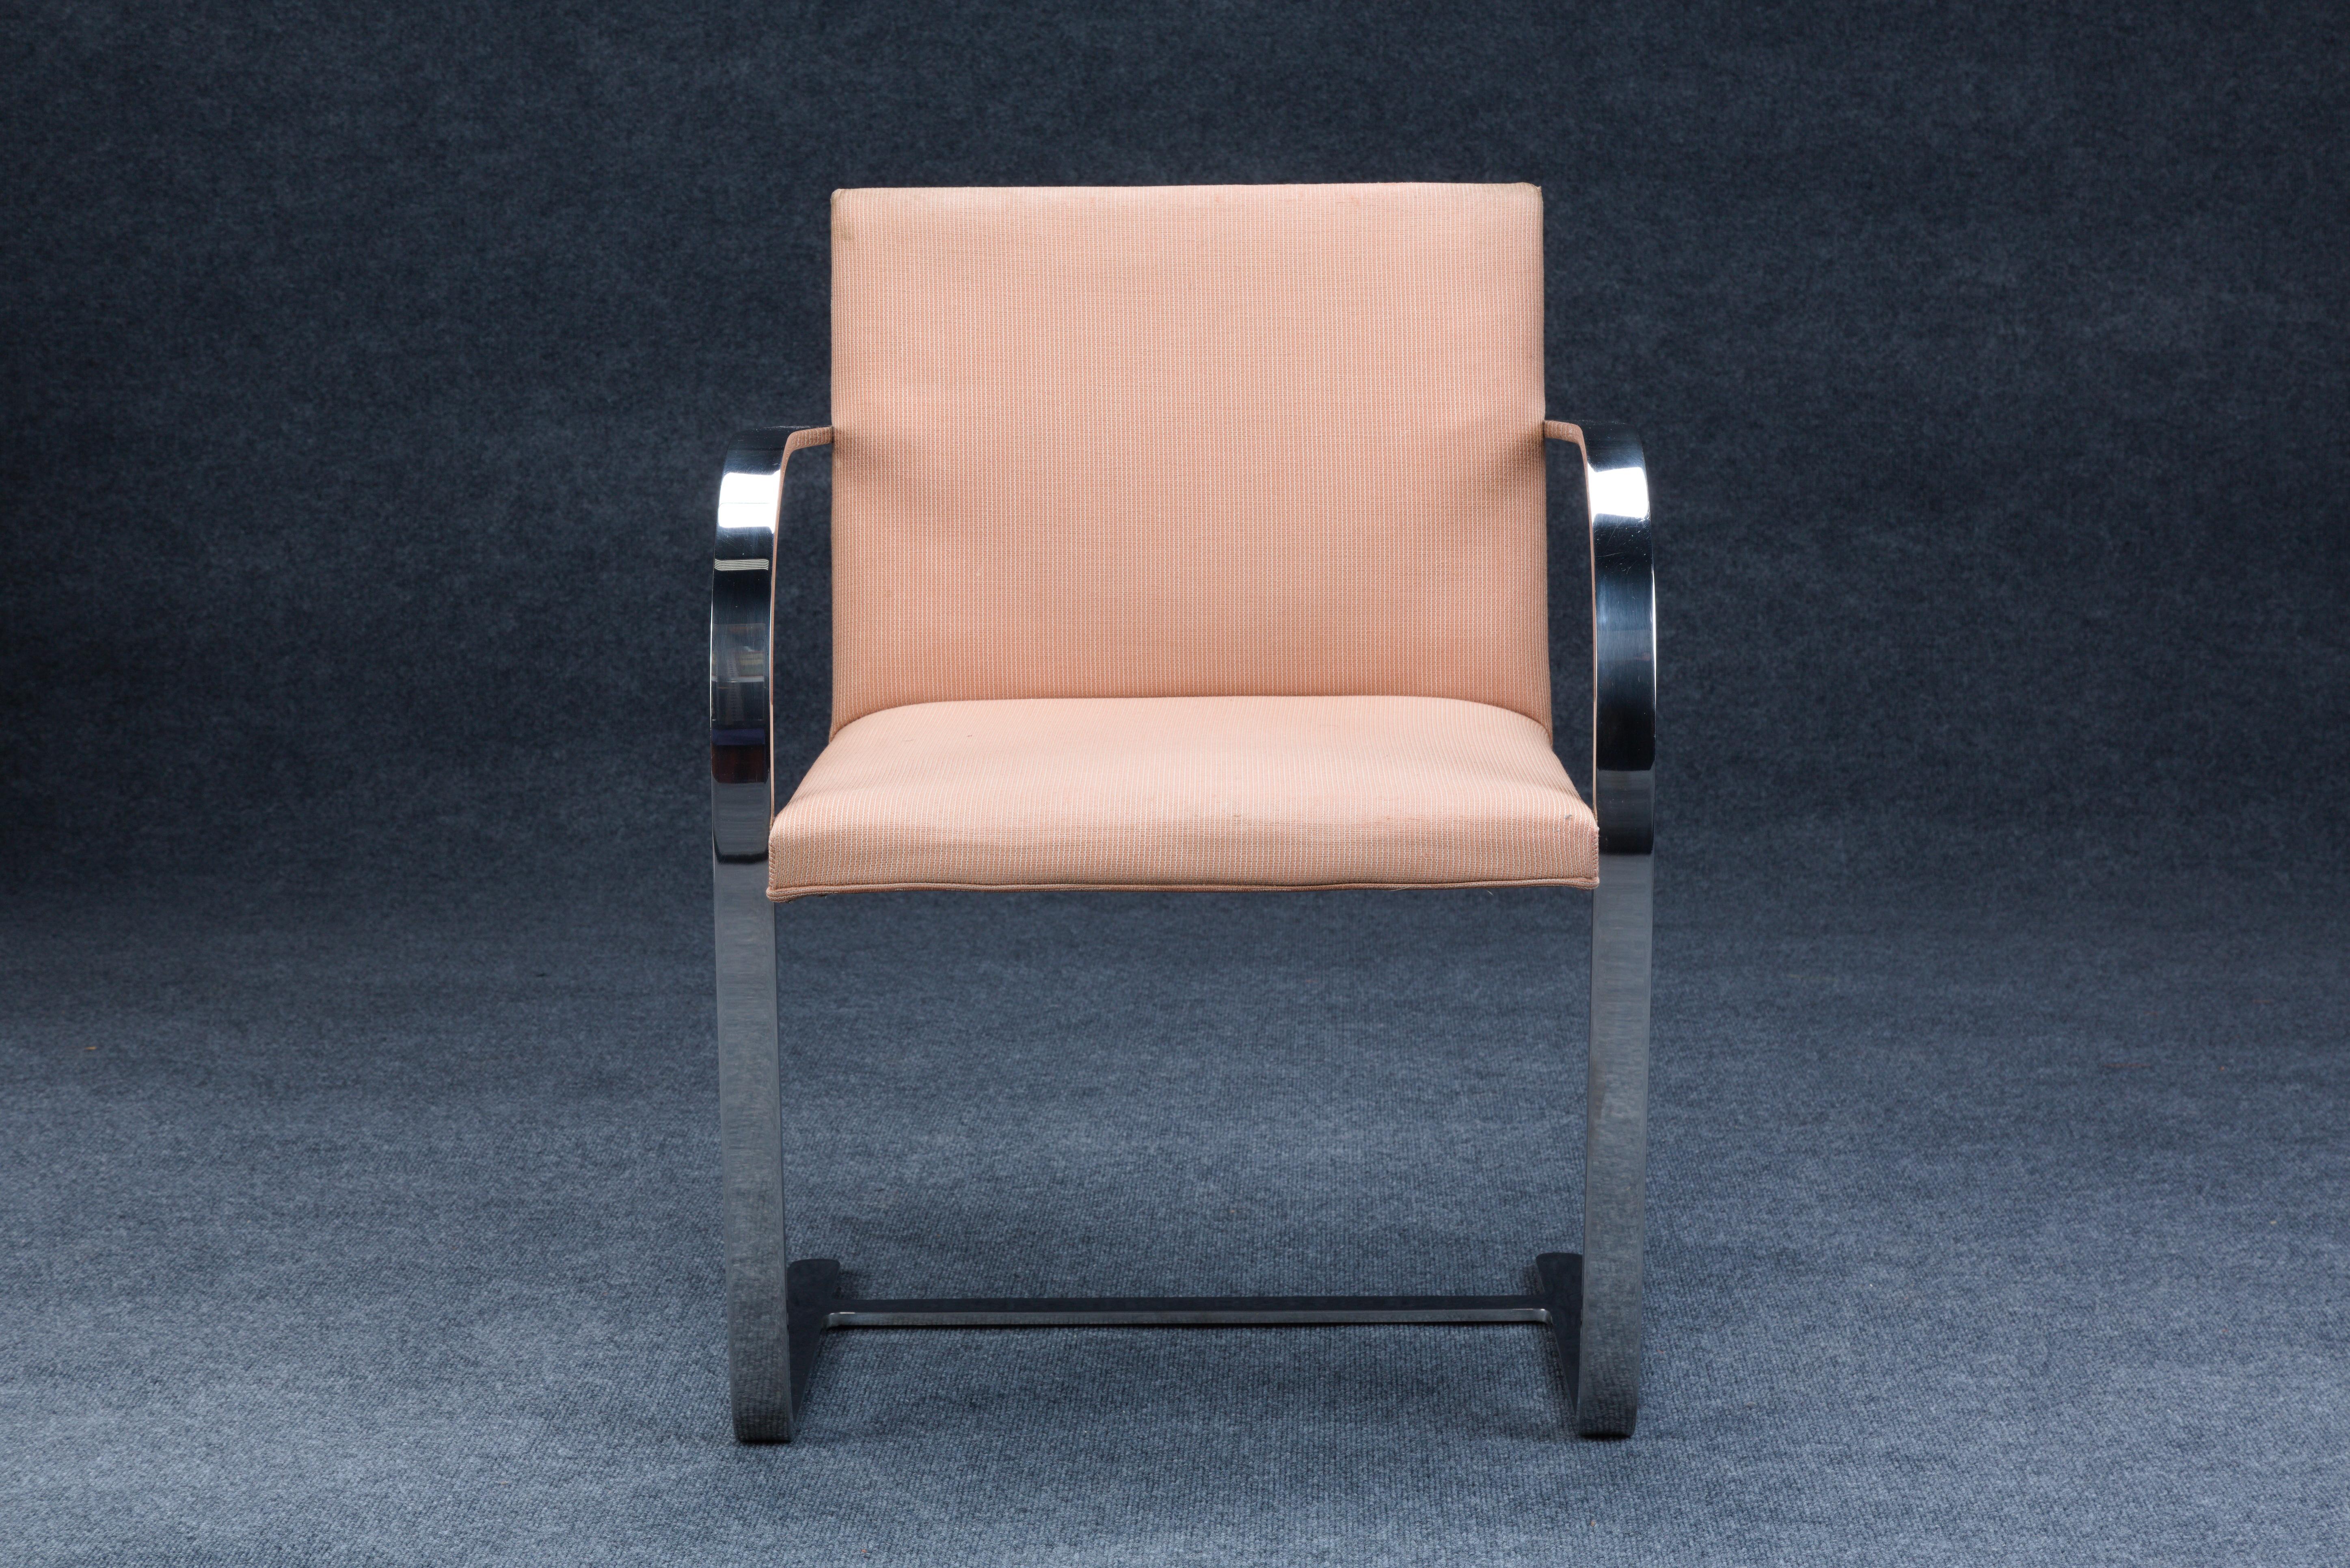 Eight Ludwig Mies van der Rohe (German, 1886-1968) for Knoll International Brno Chairs, United States, 1982, polished stainless steel frames, original upholstery, with Knoll International manufacturer's labels, ht. 31 1/2, wd. 23, dp. 20 in. Seat